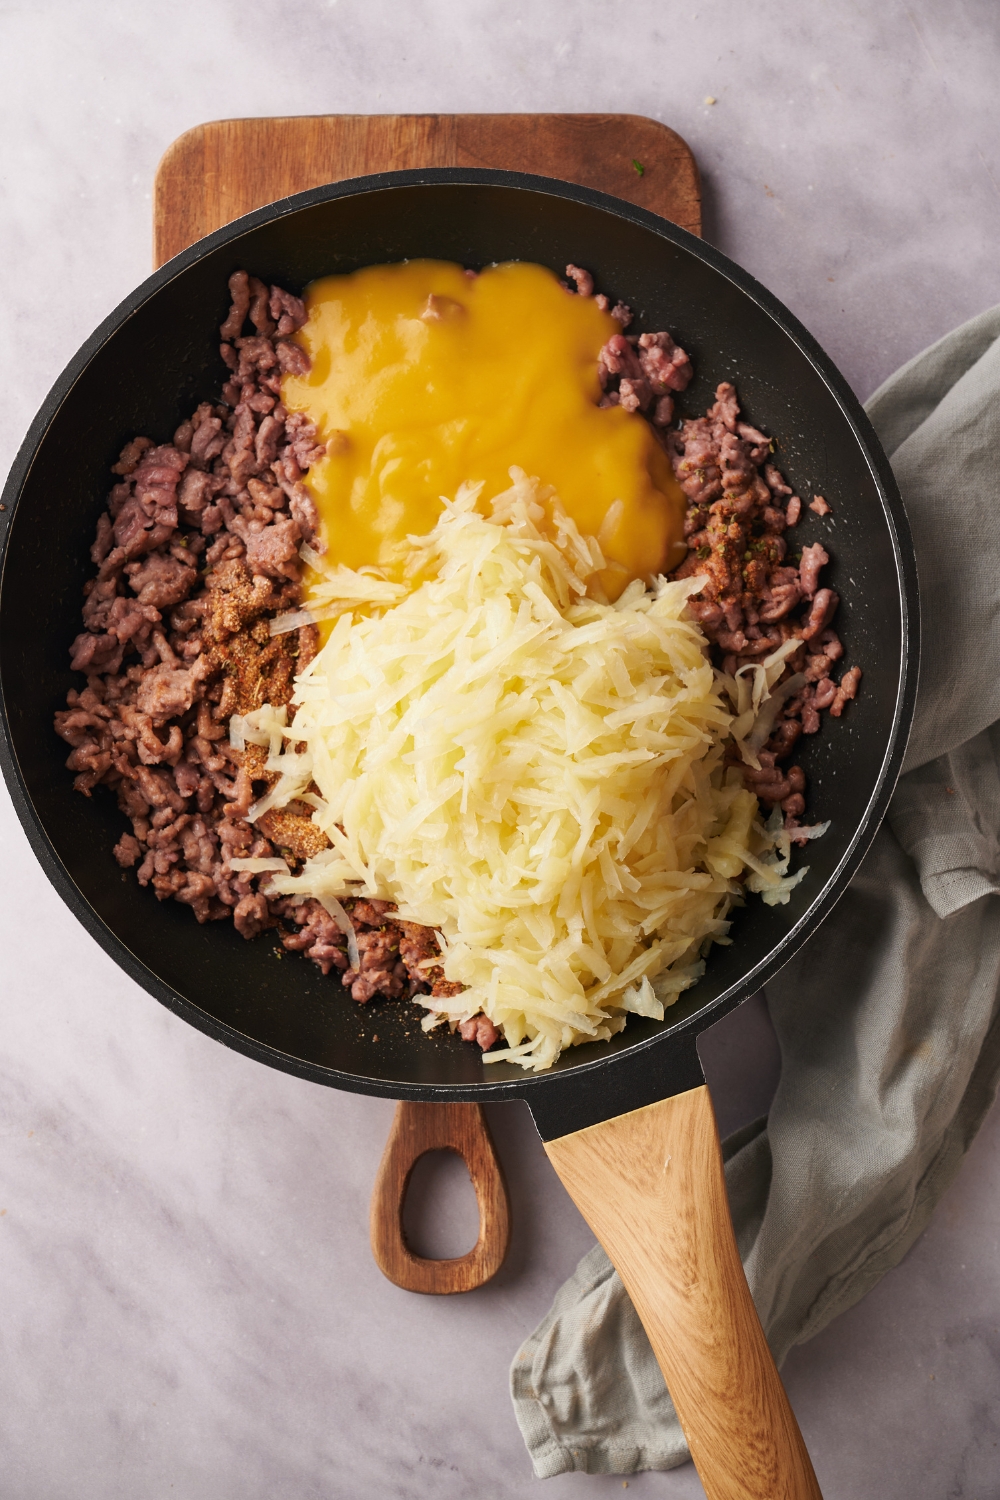 A skillet filled with cooked ground beef, seasoning, hash browns, and condensed soup.